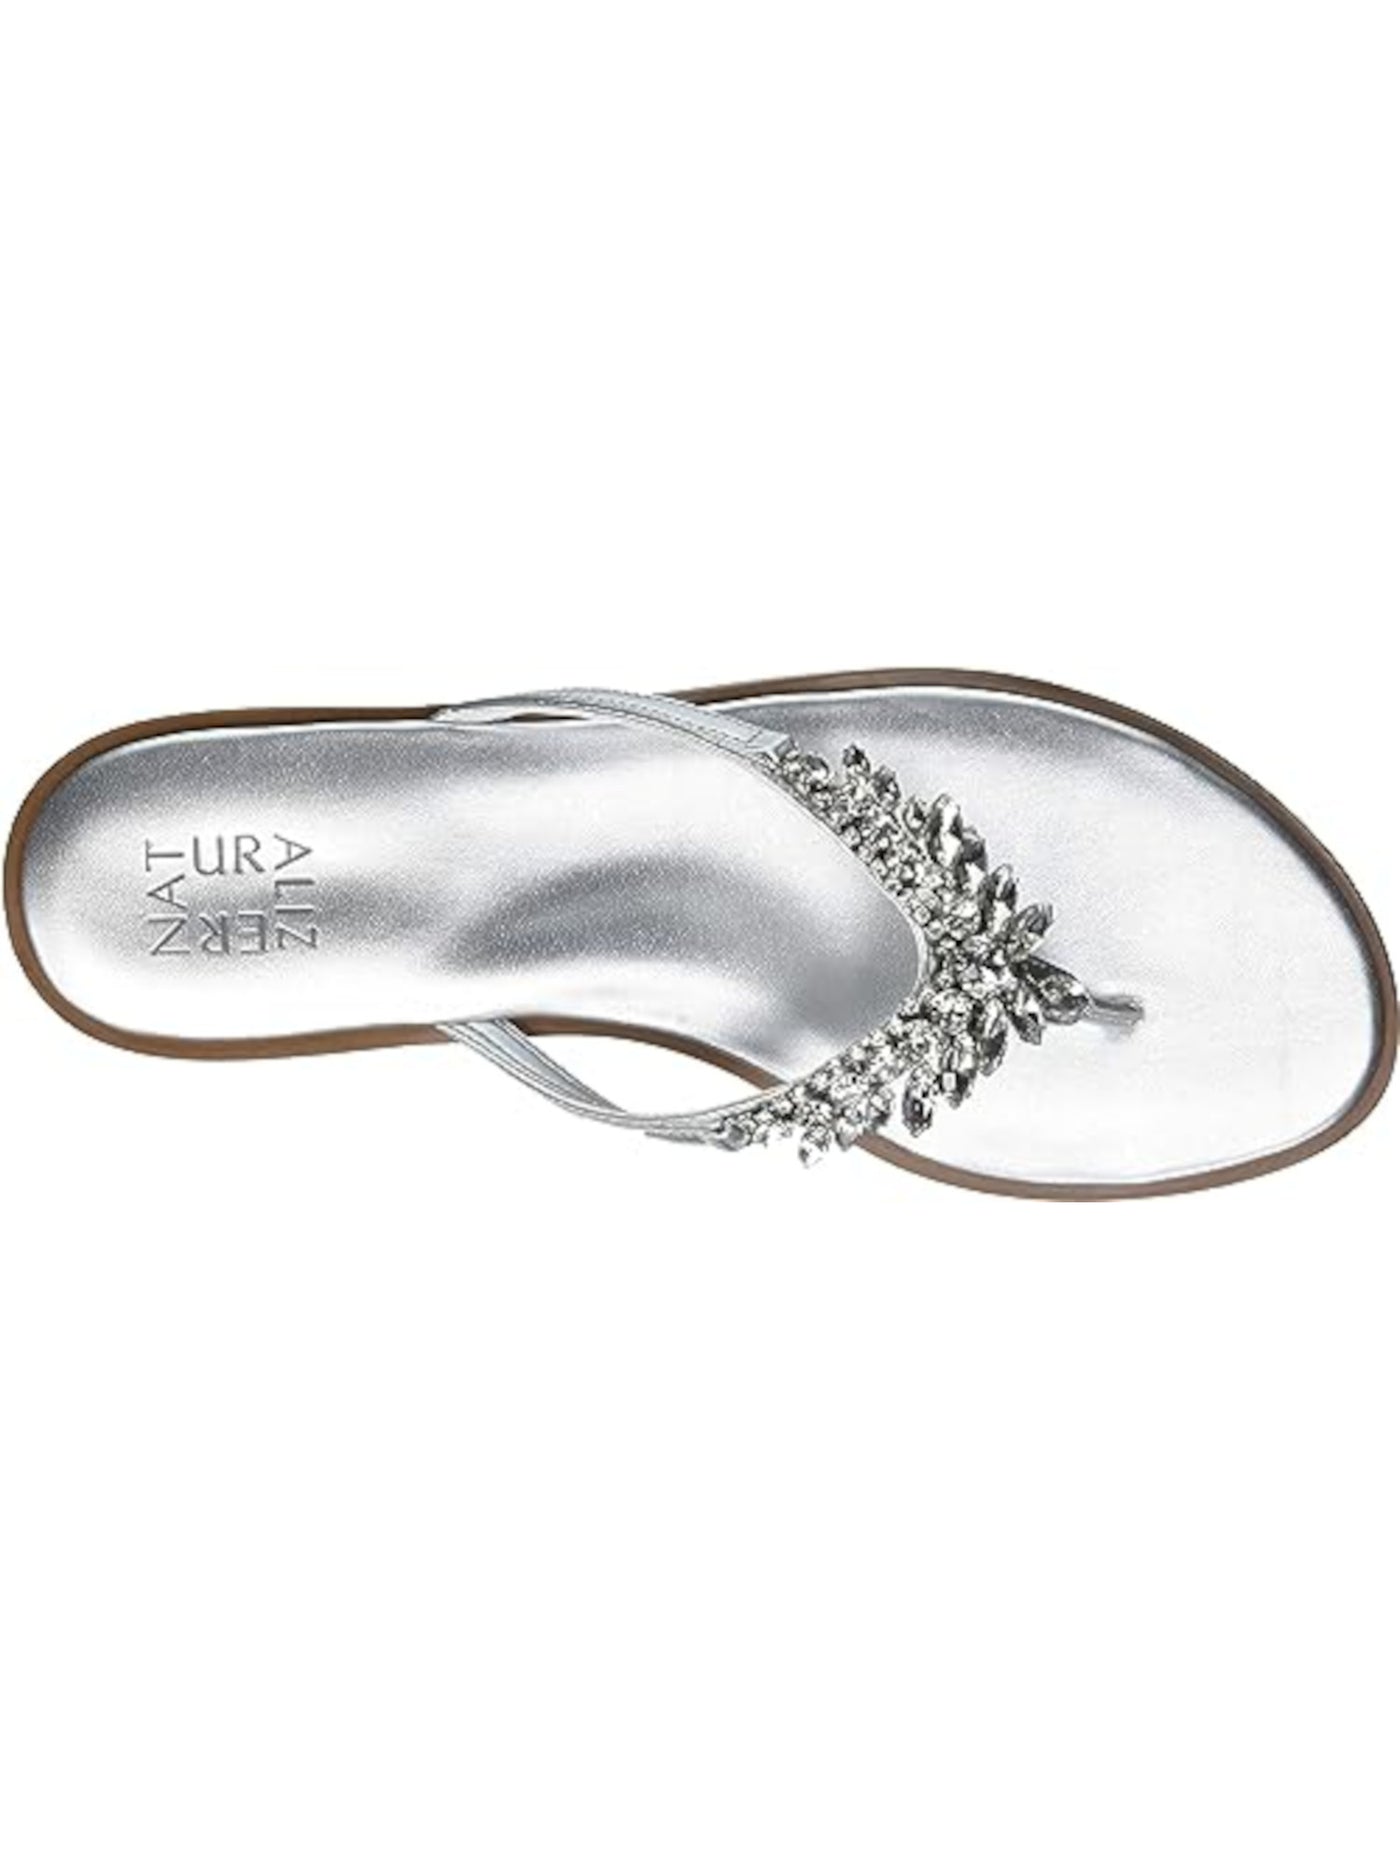 NATURALIZER Womens Silver Embellished Fallyn Round Toe Slip On Thong Sandals Shoes 6.5 M